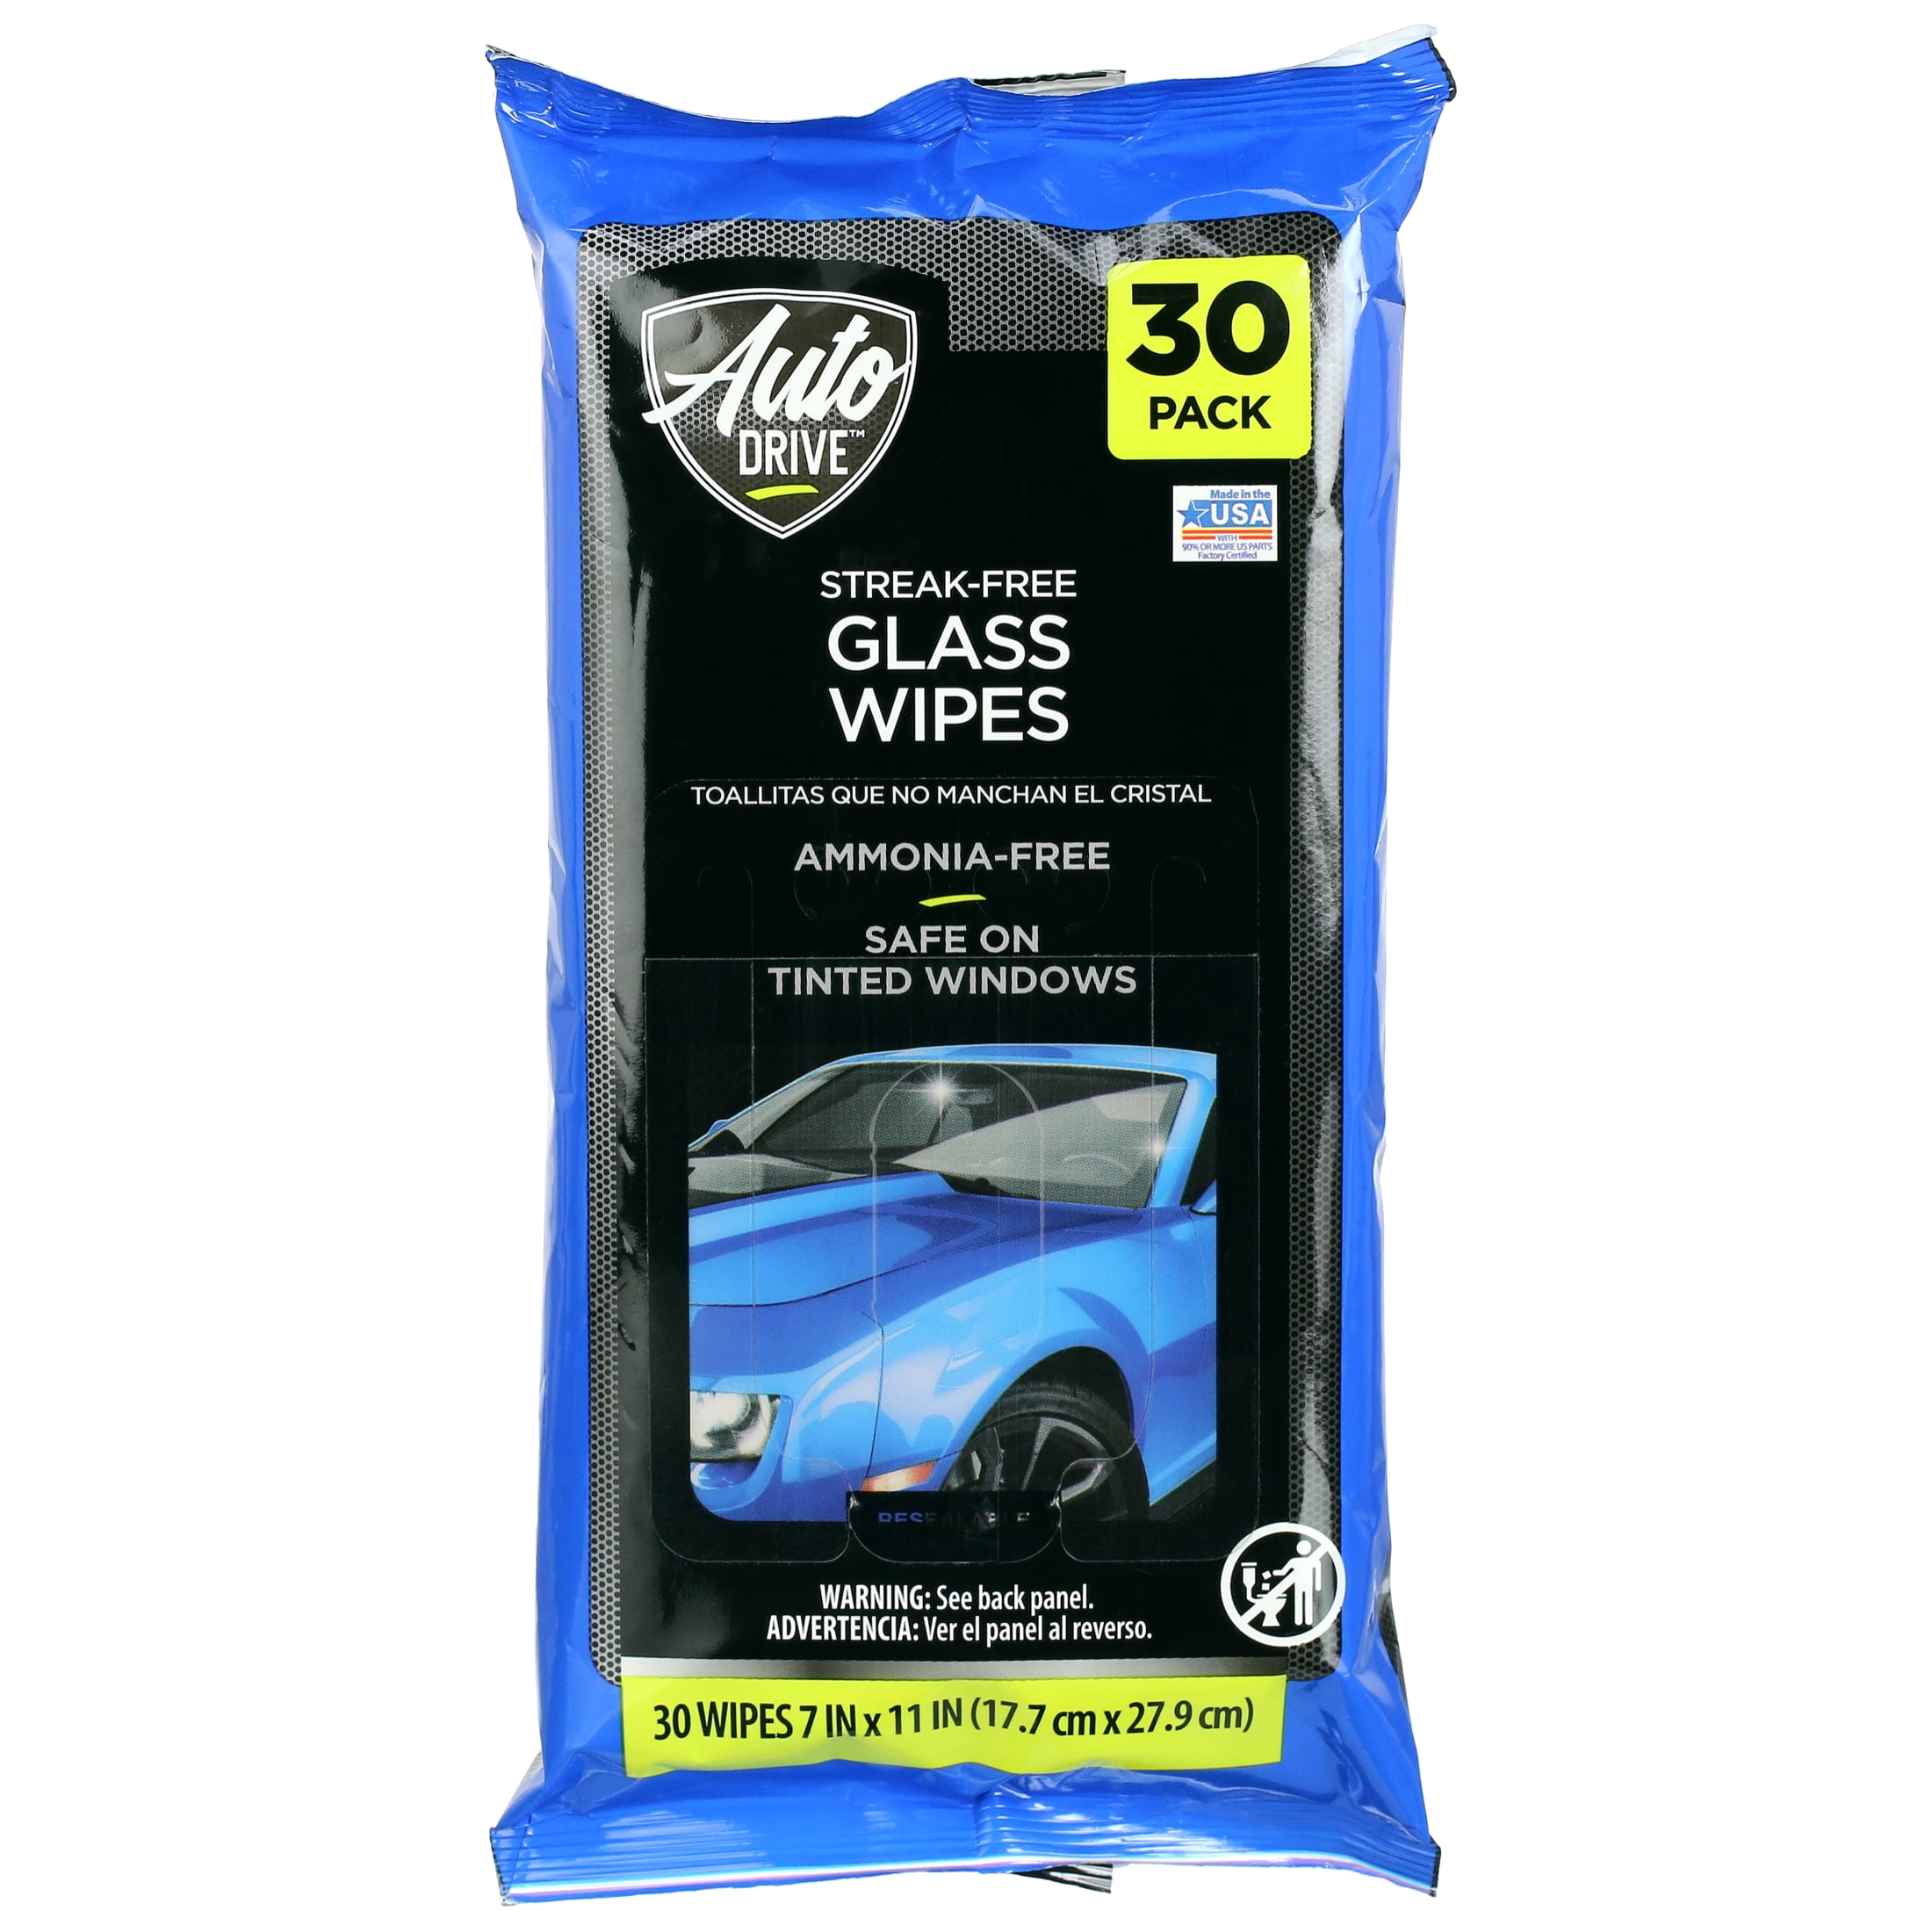  AREON Auto Care I Car Glass Wipes for Car Windows I Travel Pack  I (2 x 25 Count) : Automotive